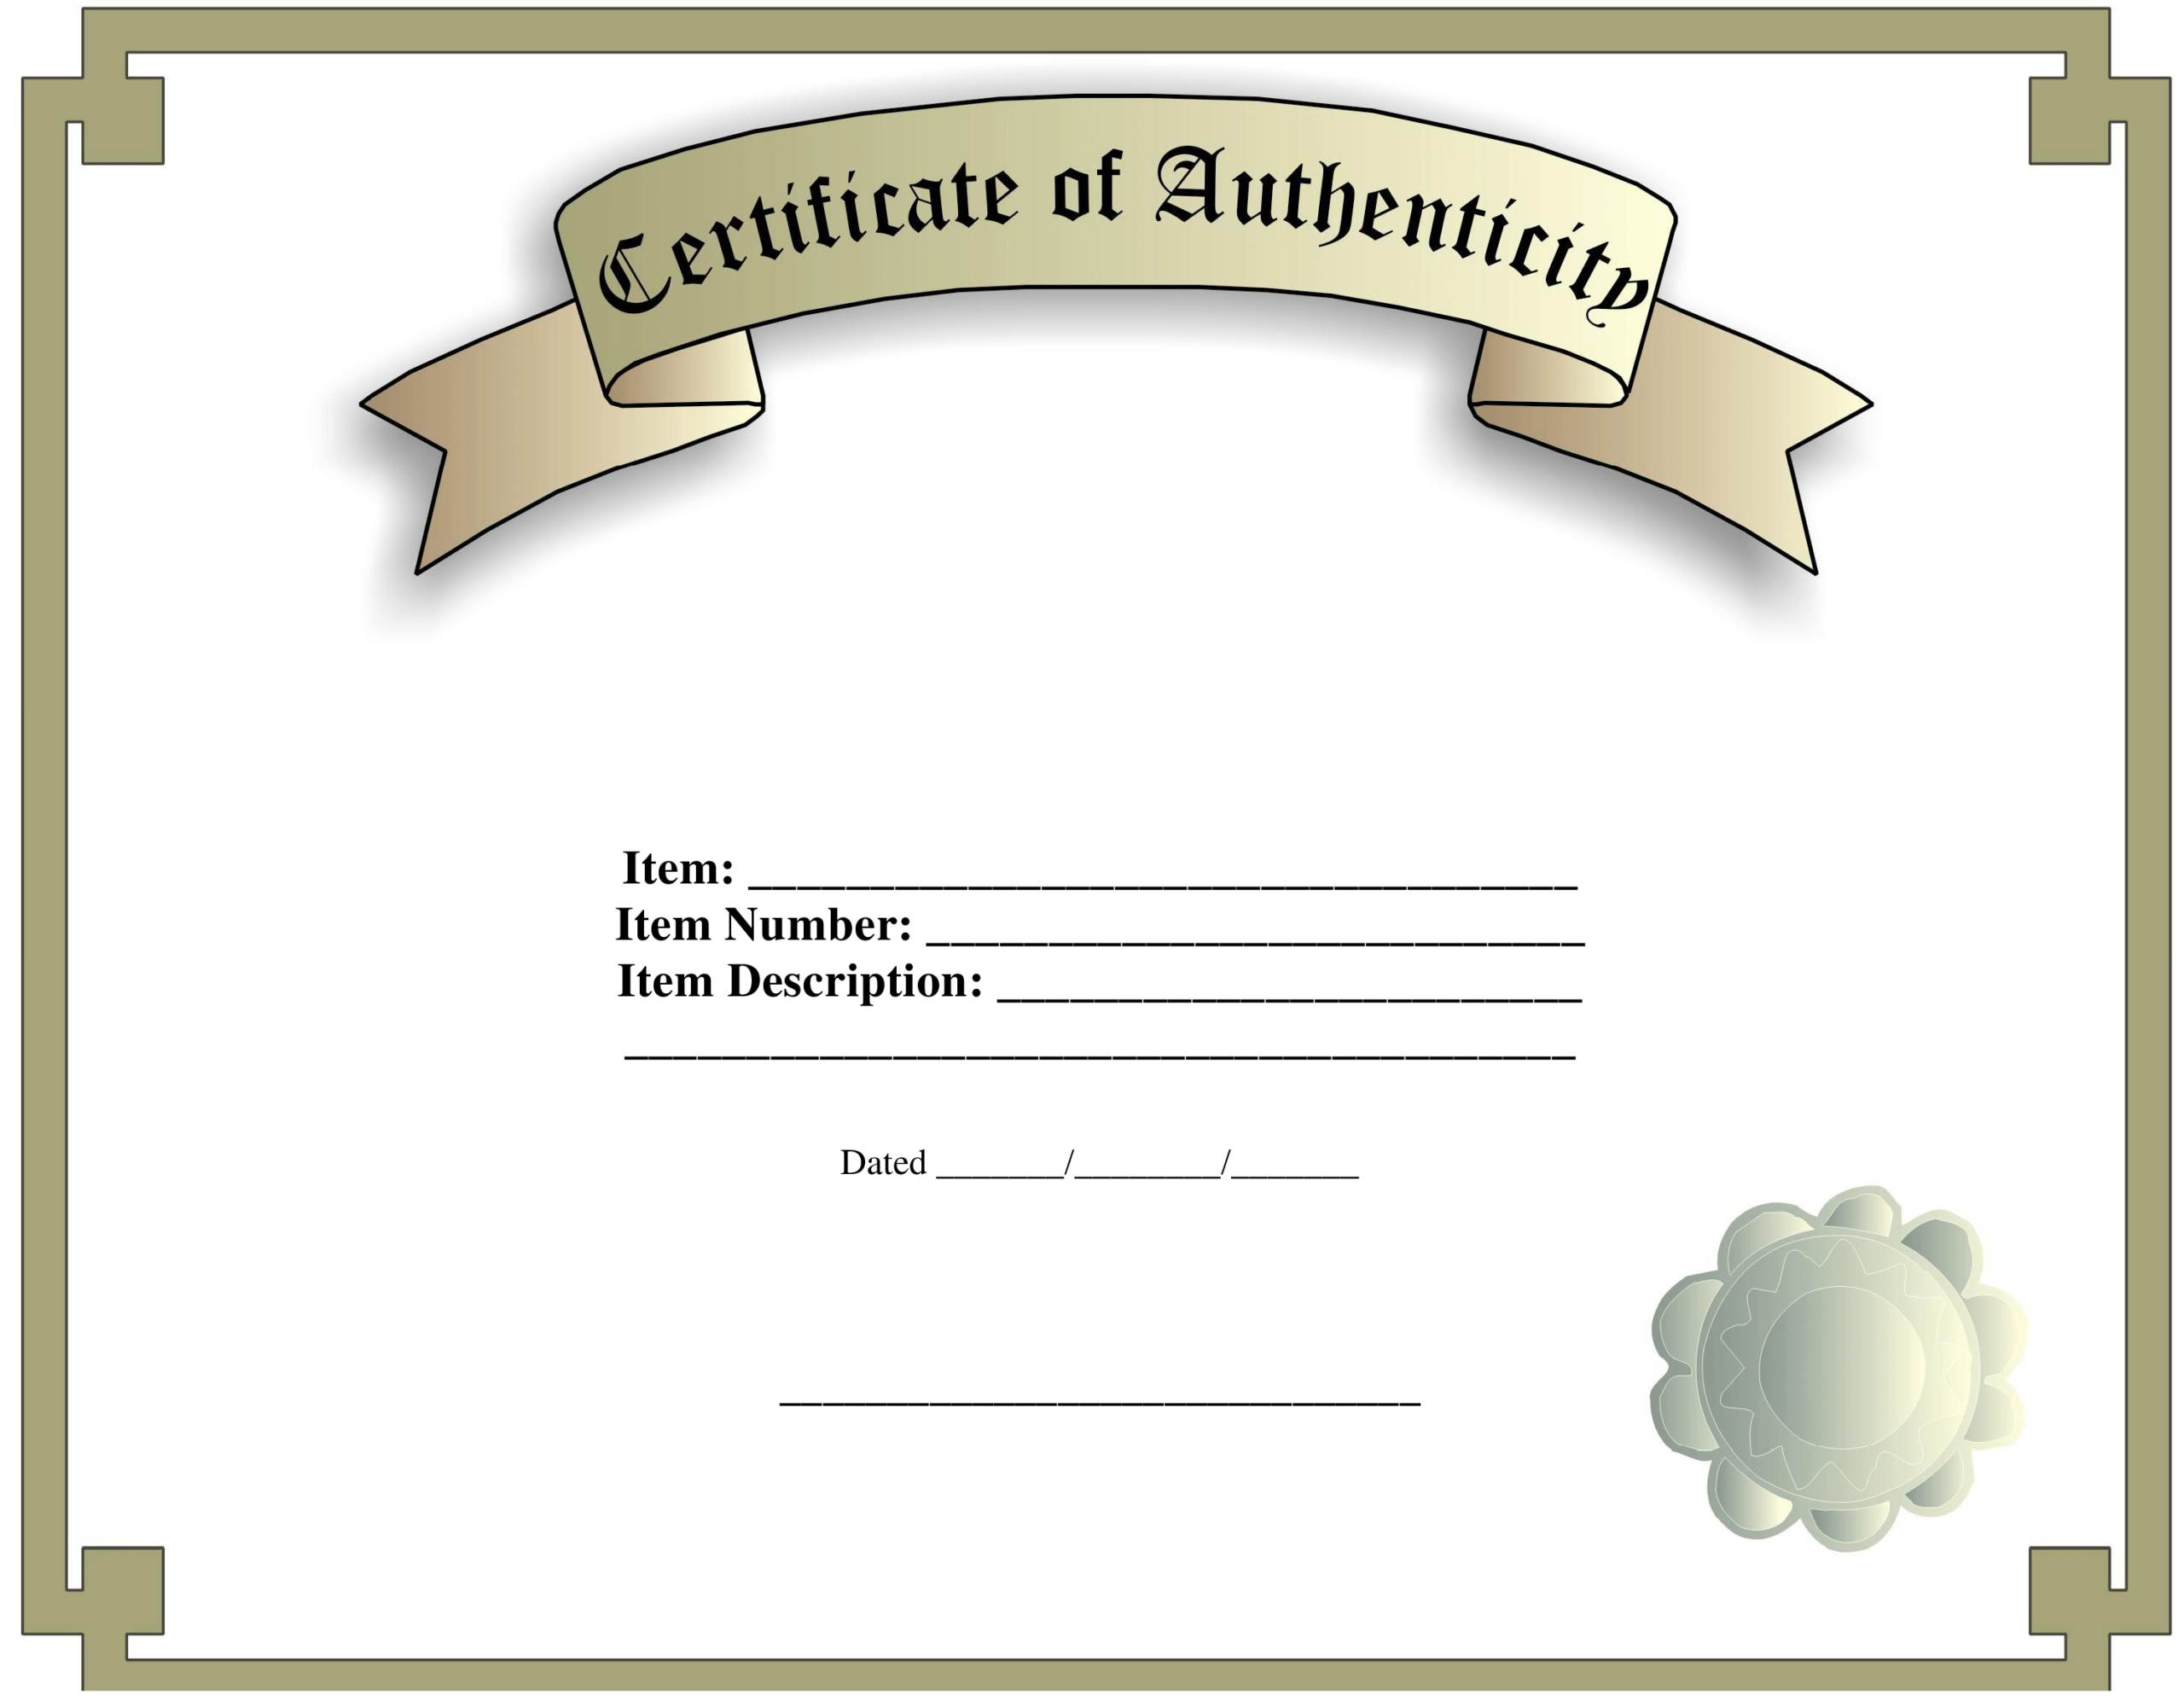 Certificate Of Authenticity Template | Templates At Intended For Certificate Of Authenticity Template